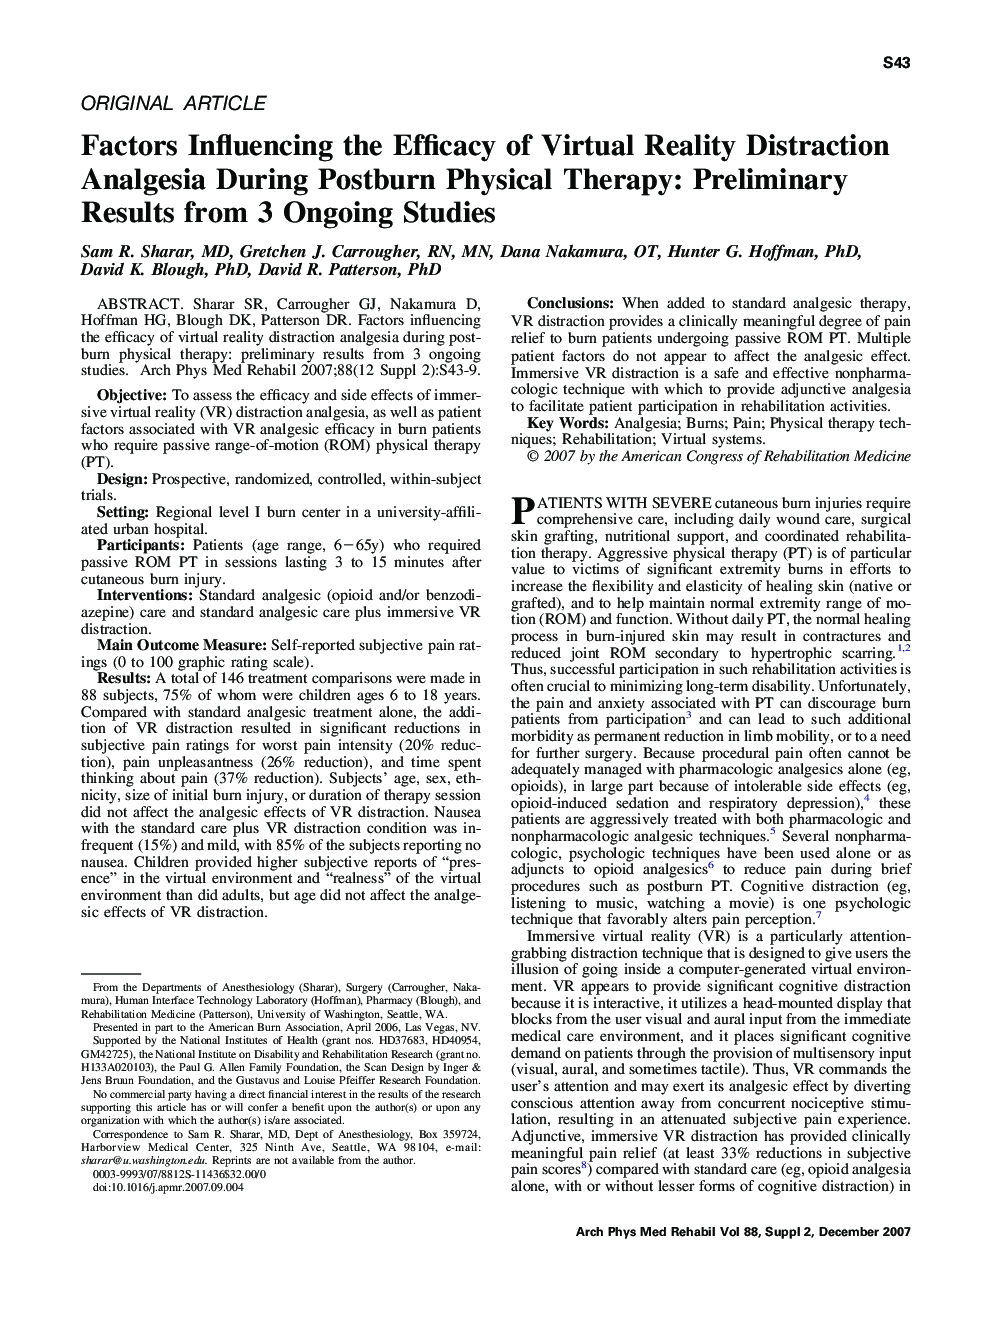 Factors Influencing the Efficacy of Virtual Reality Distraction Analgesia During Postburn Physical Therapy: Preliminary Results from 3 Ongoing Studies 